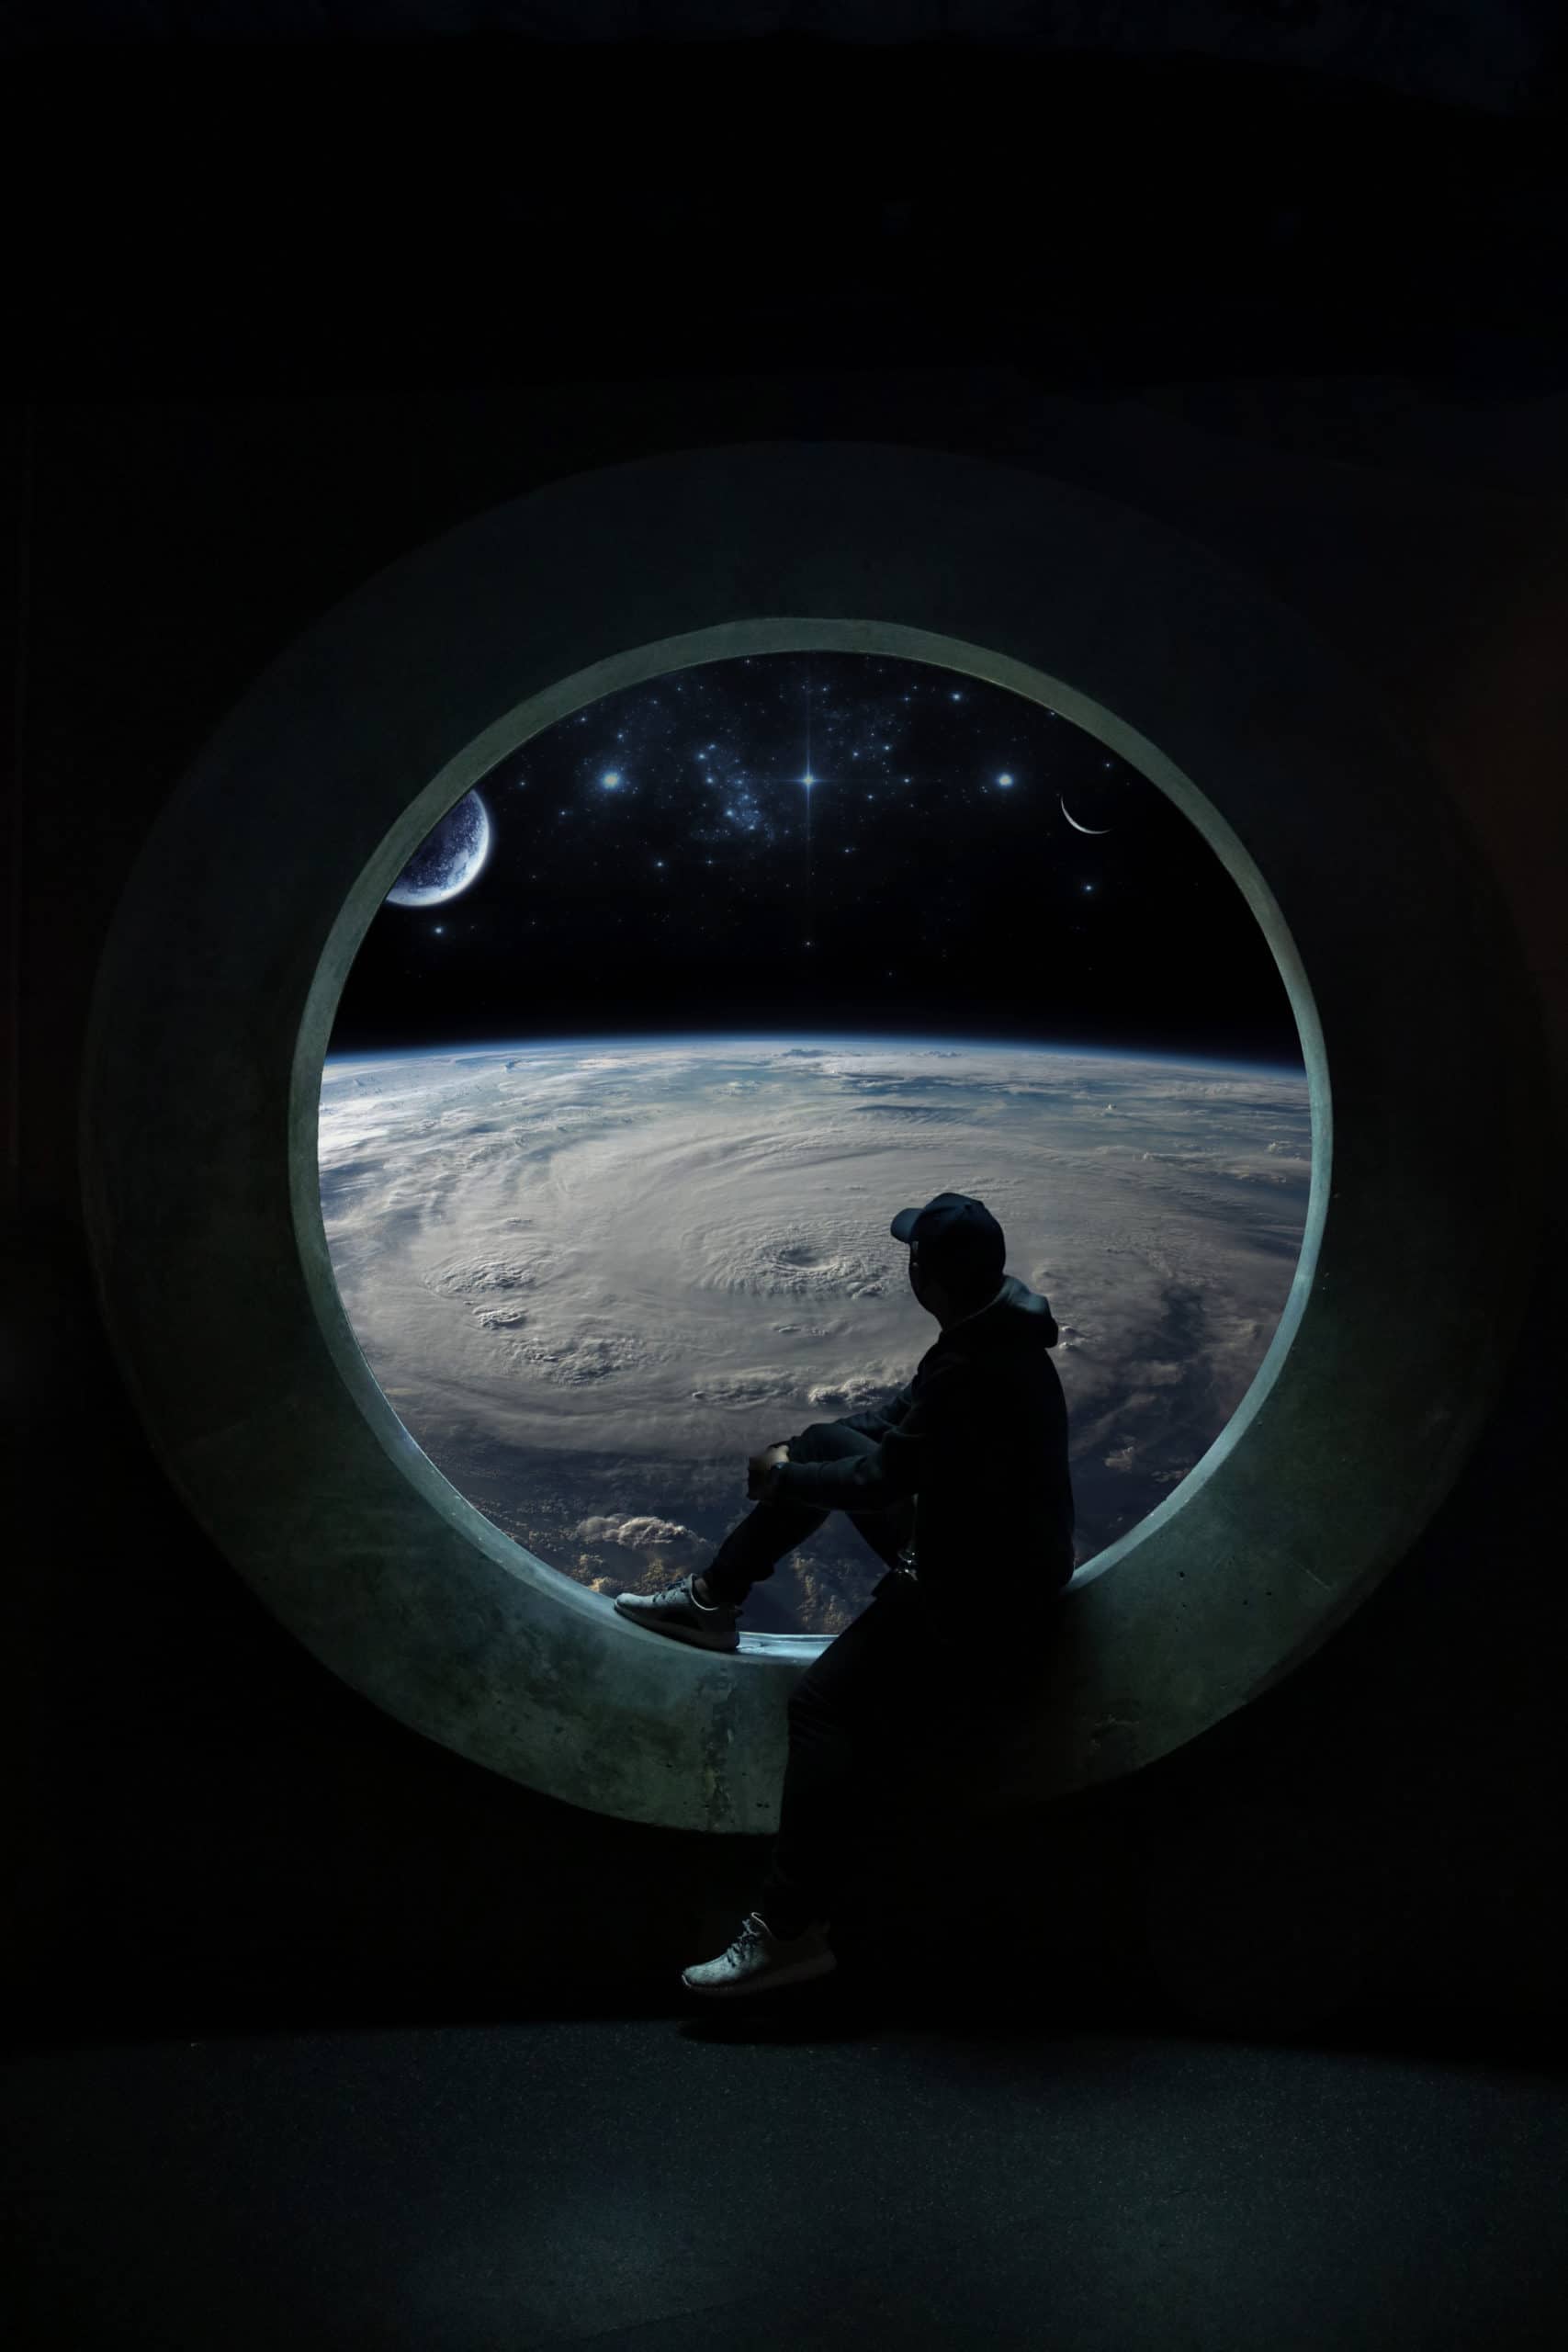 How to Create a Photo Manipulation Scene from the Other Side - A View of Earth from Space